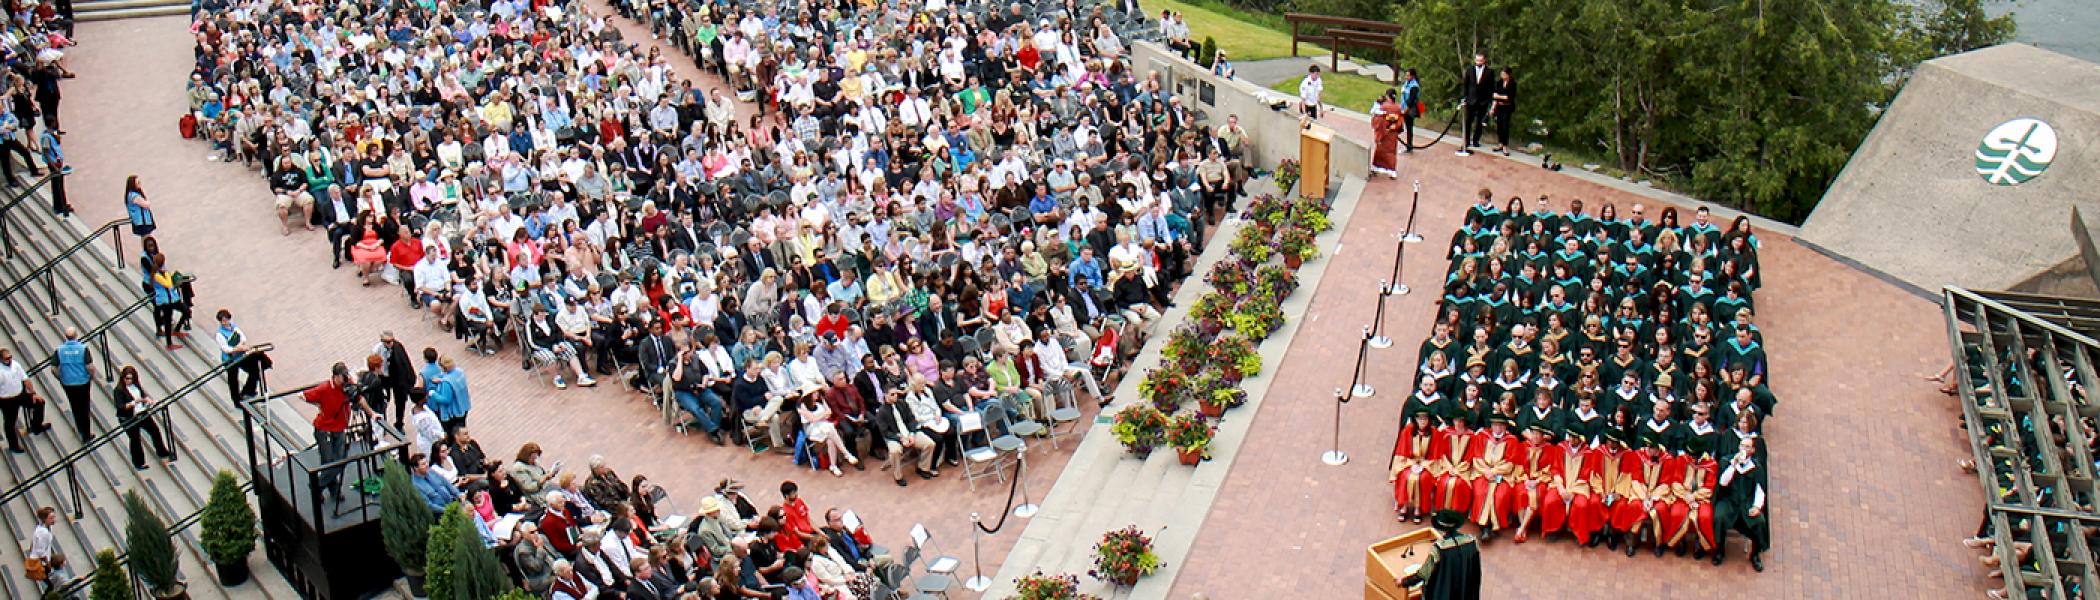 Arial photo of the podium at Bata library during convocation. The seats are all full.